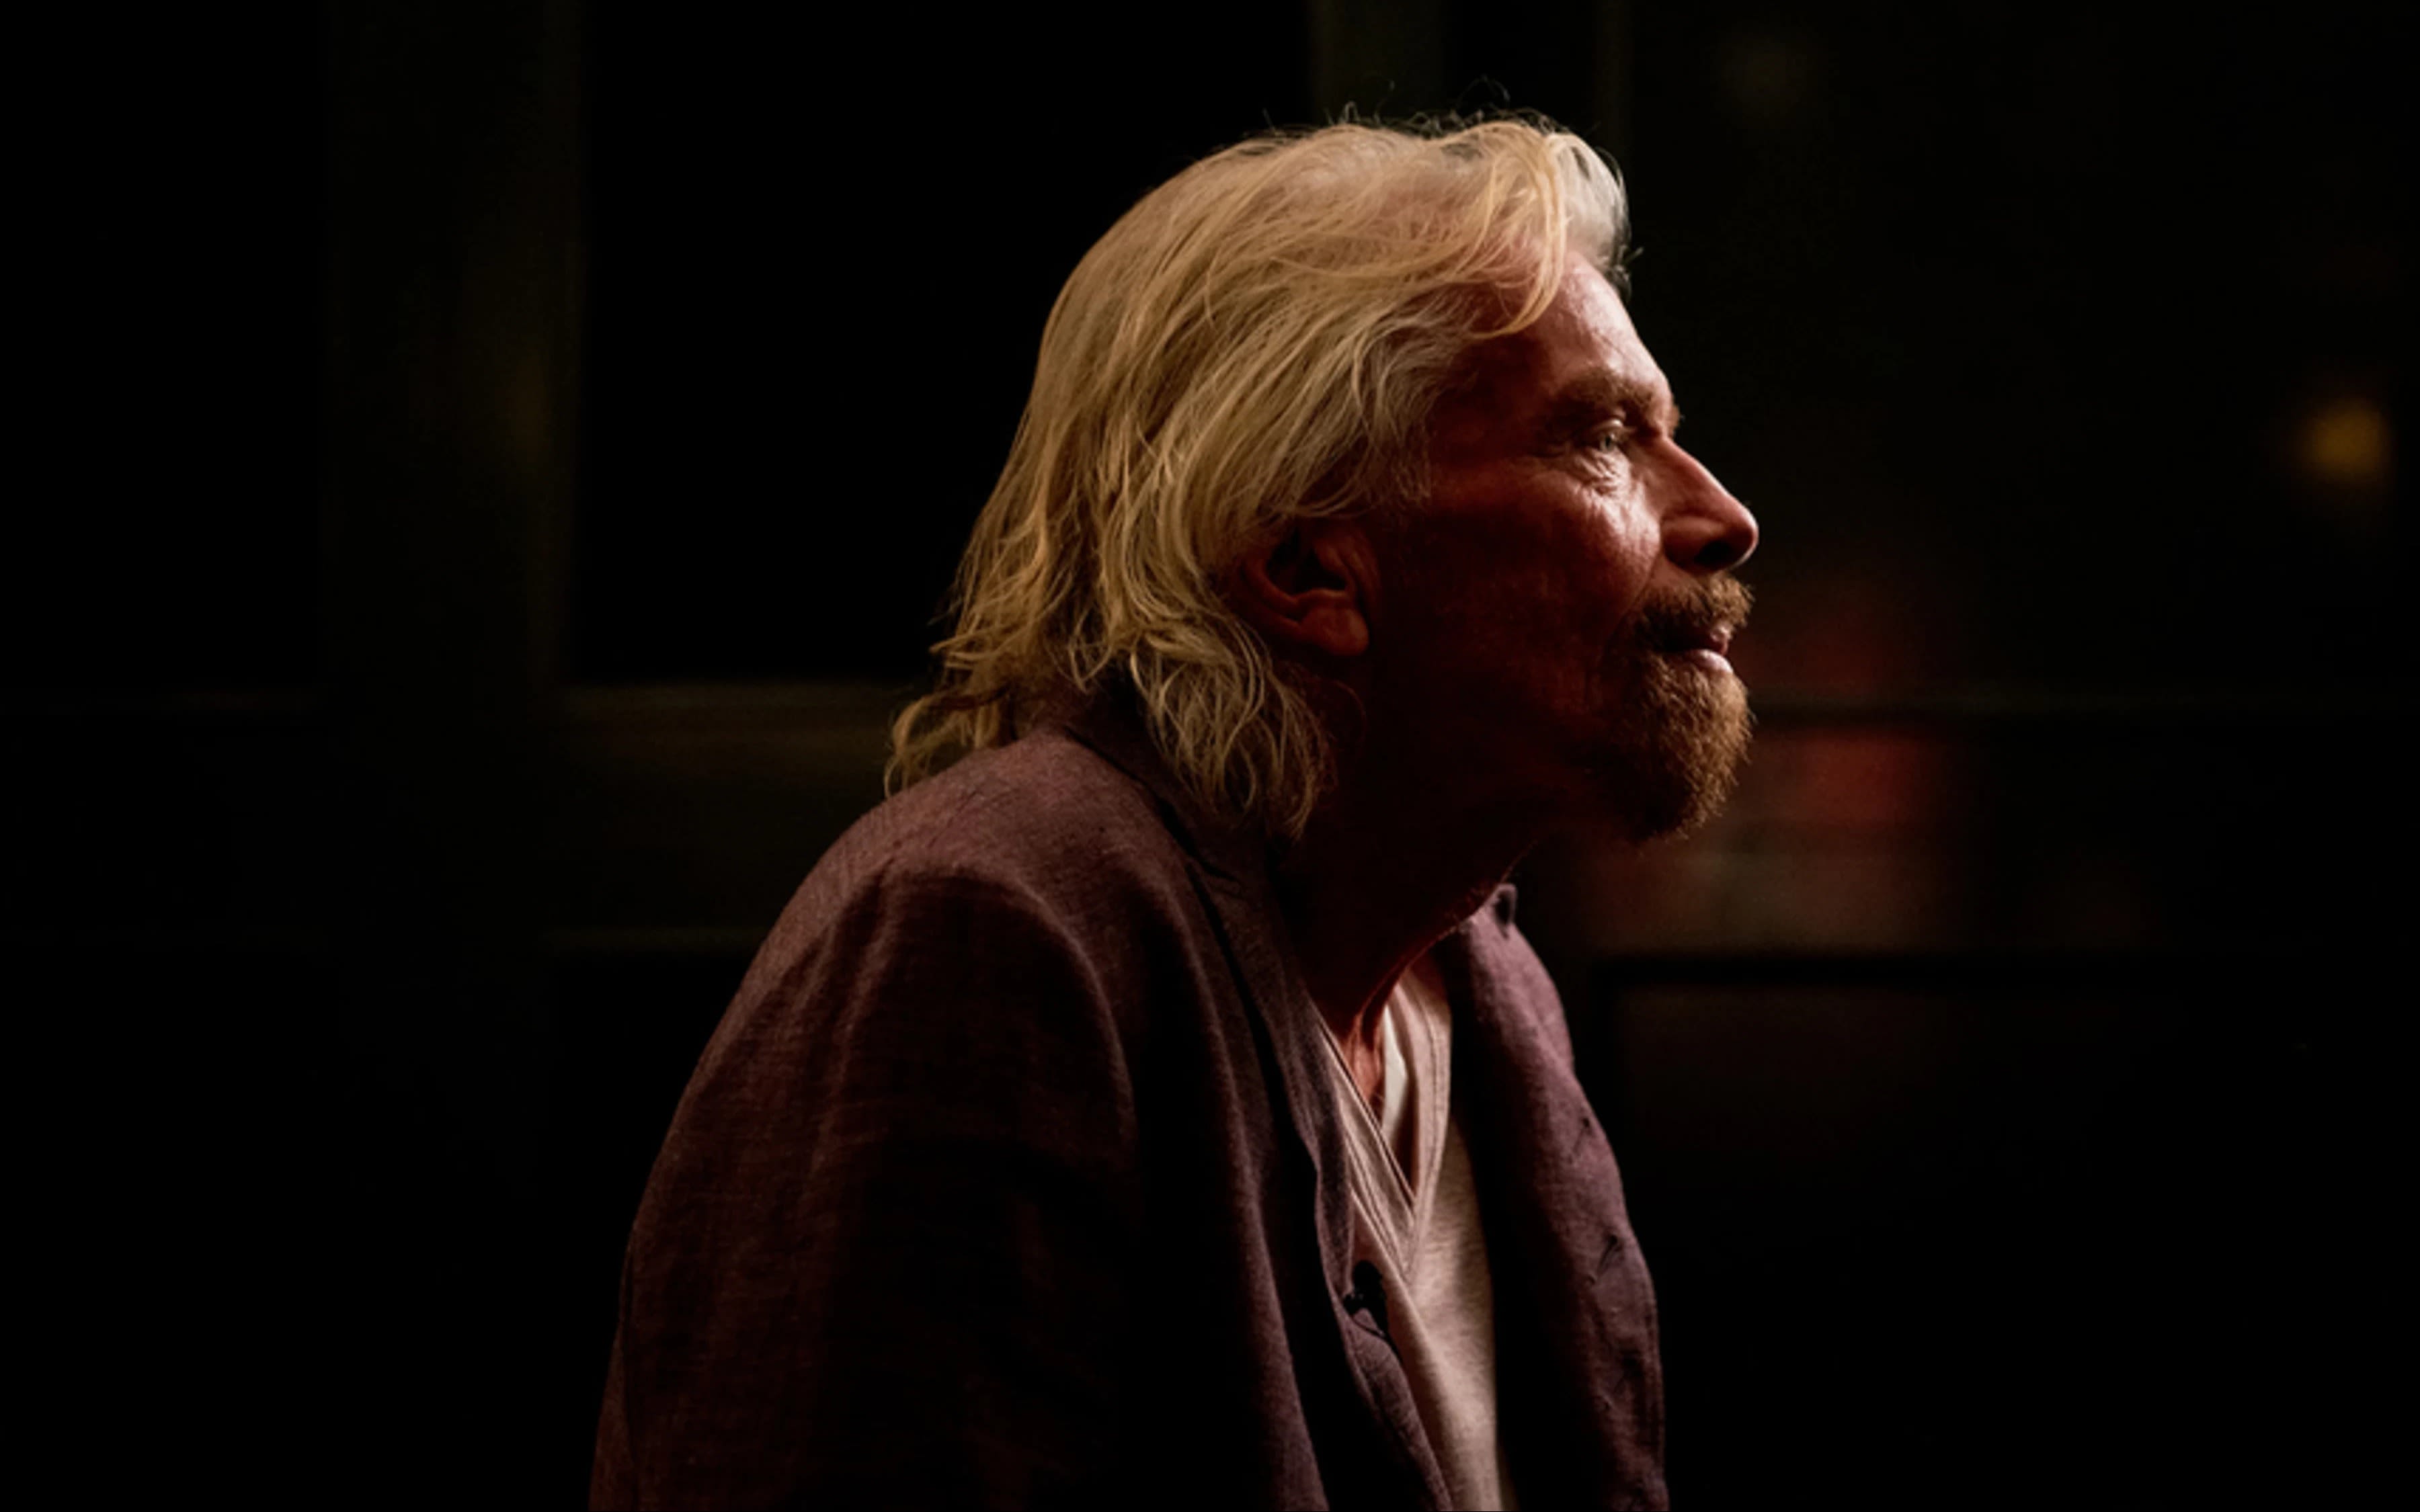 Richard Branson deep in thought